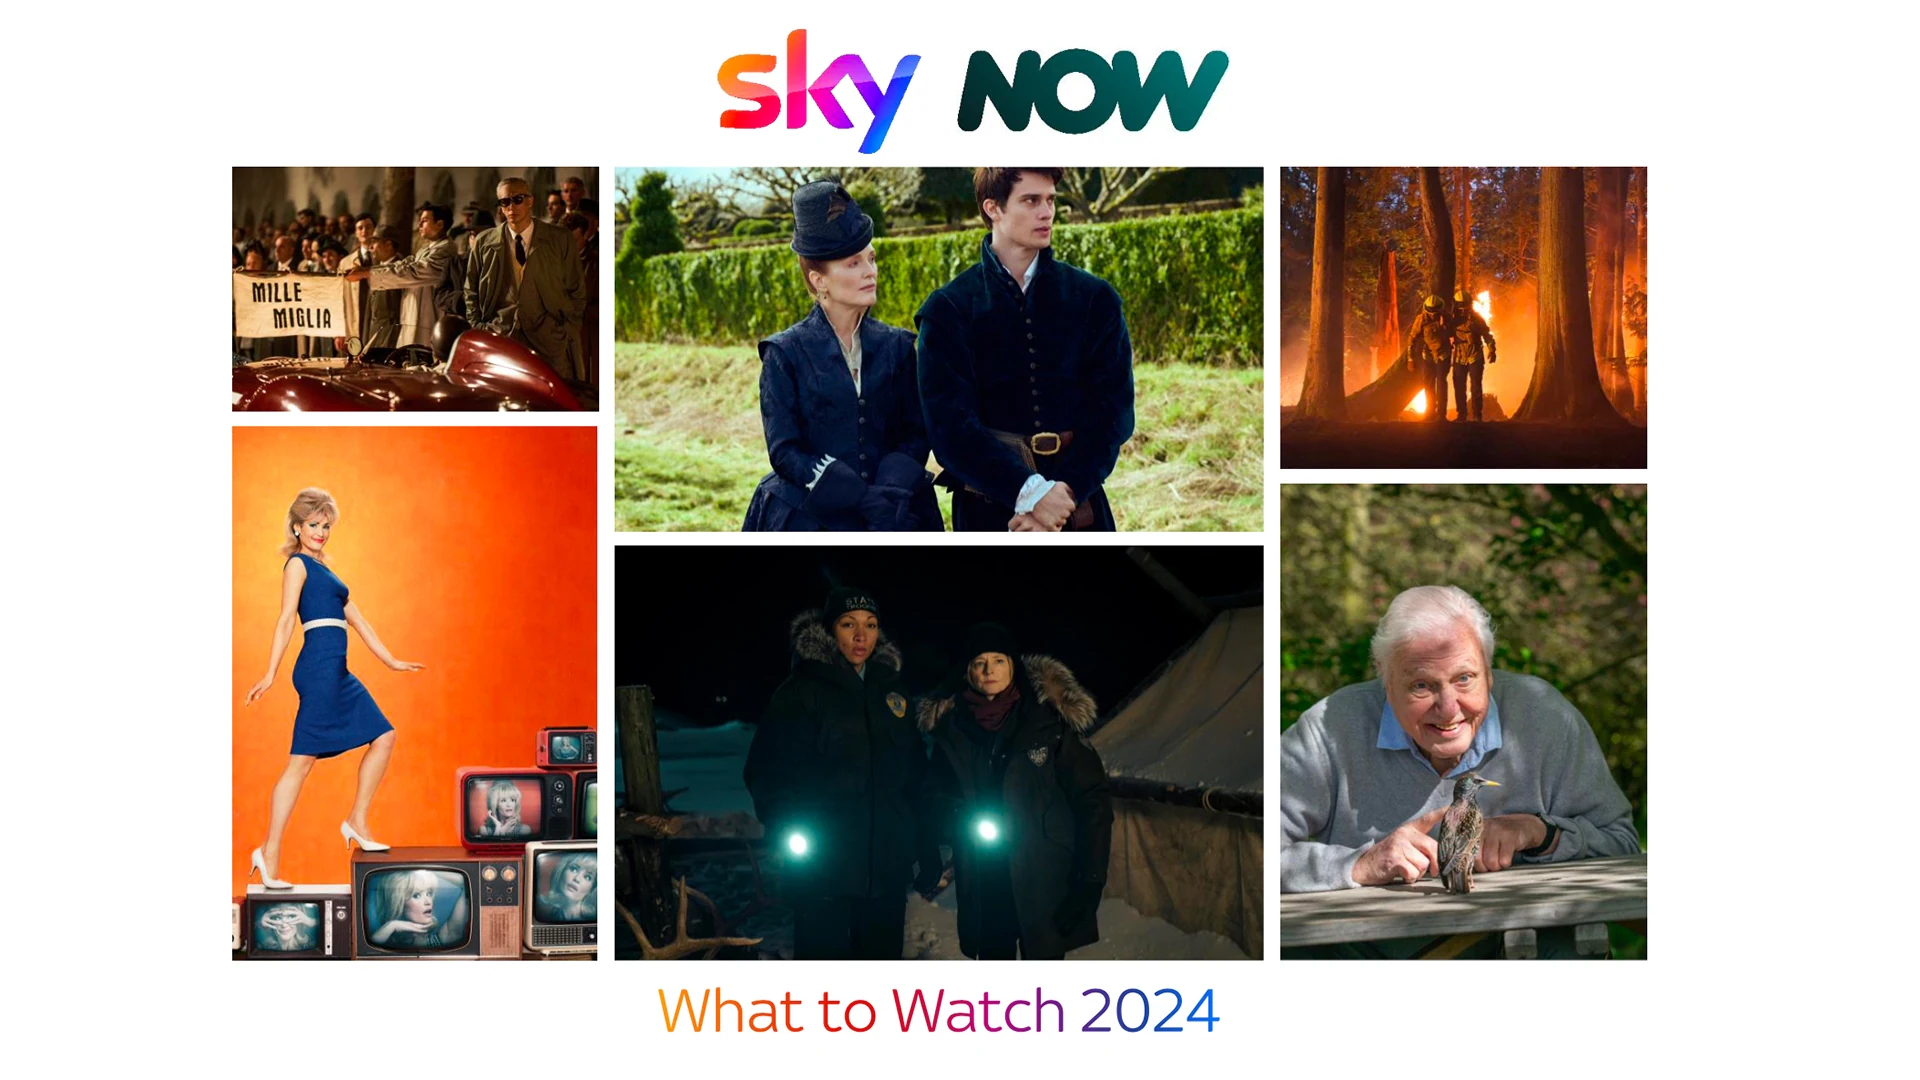 Sky & NOW What to Watch 2024